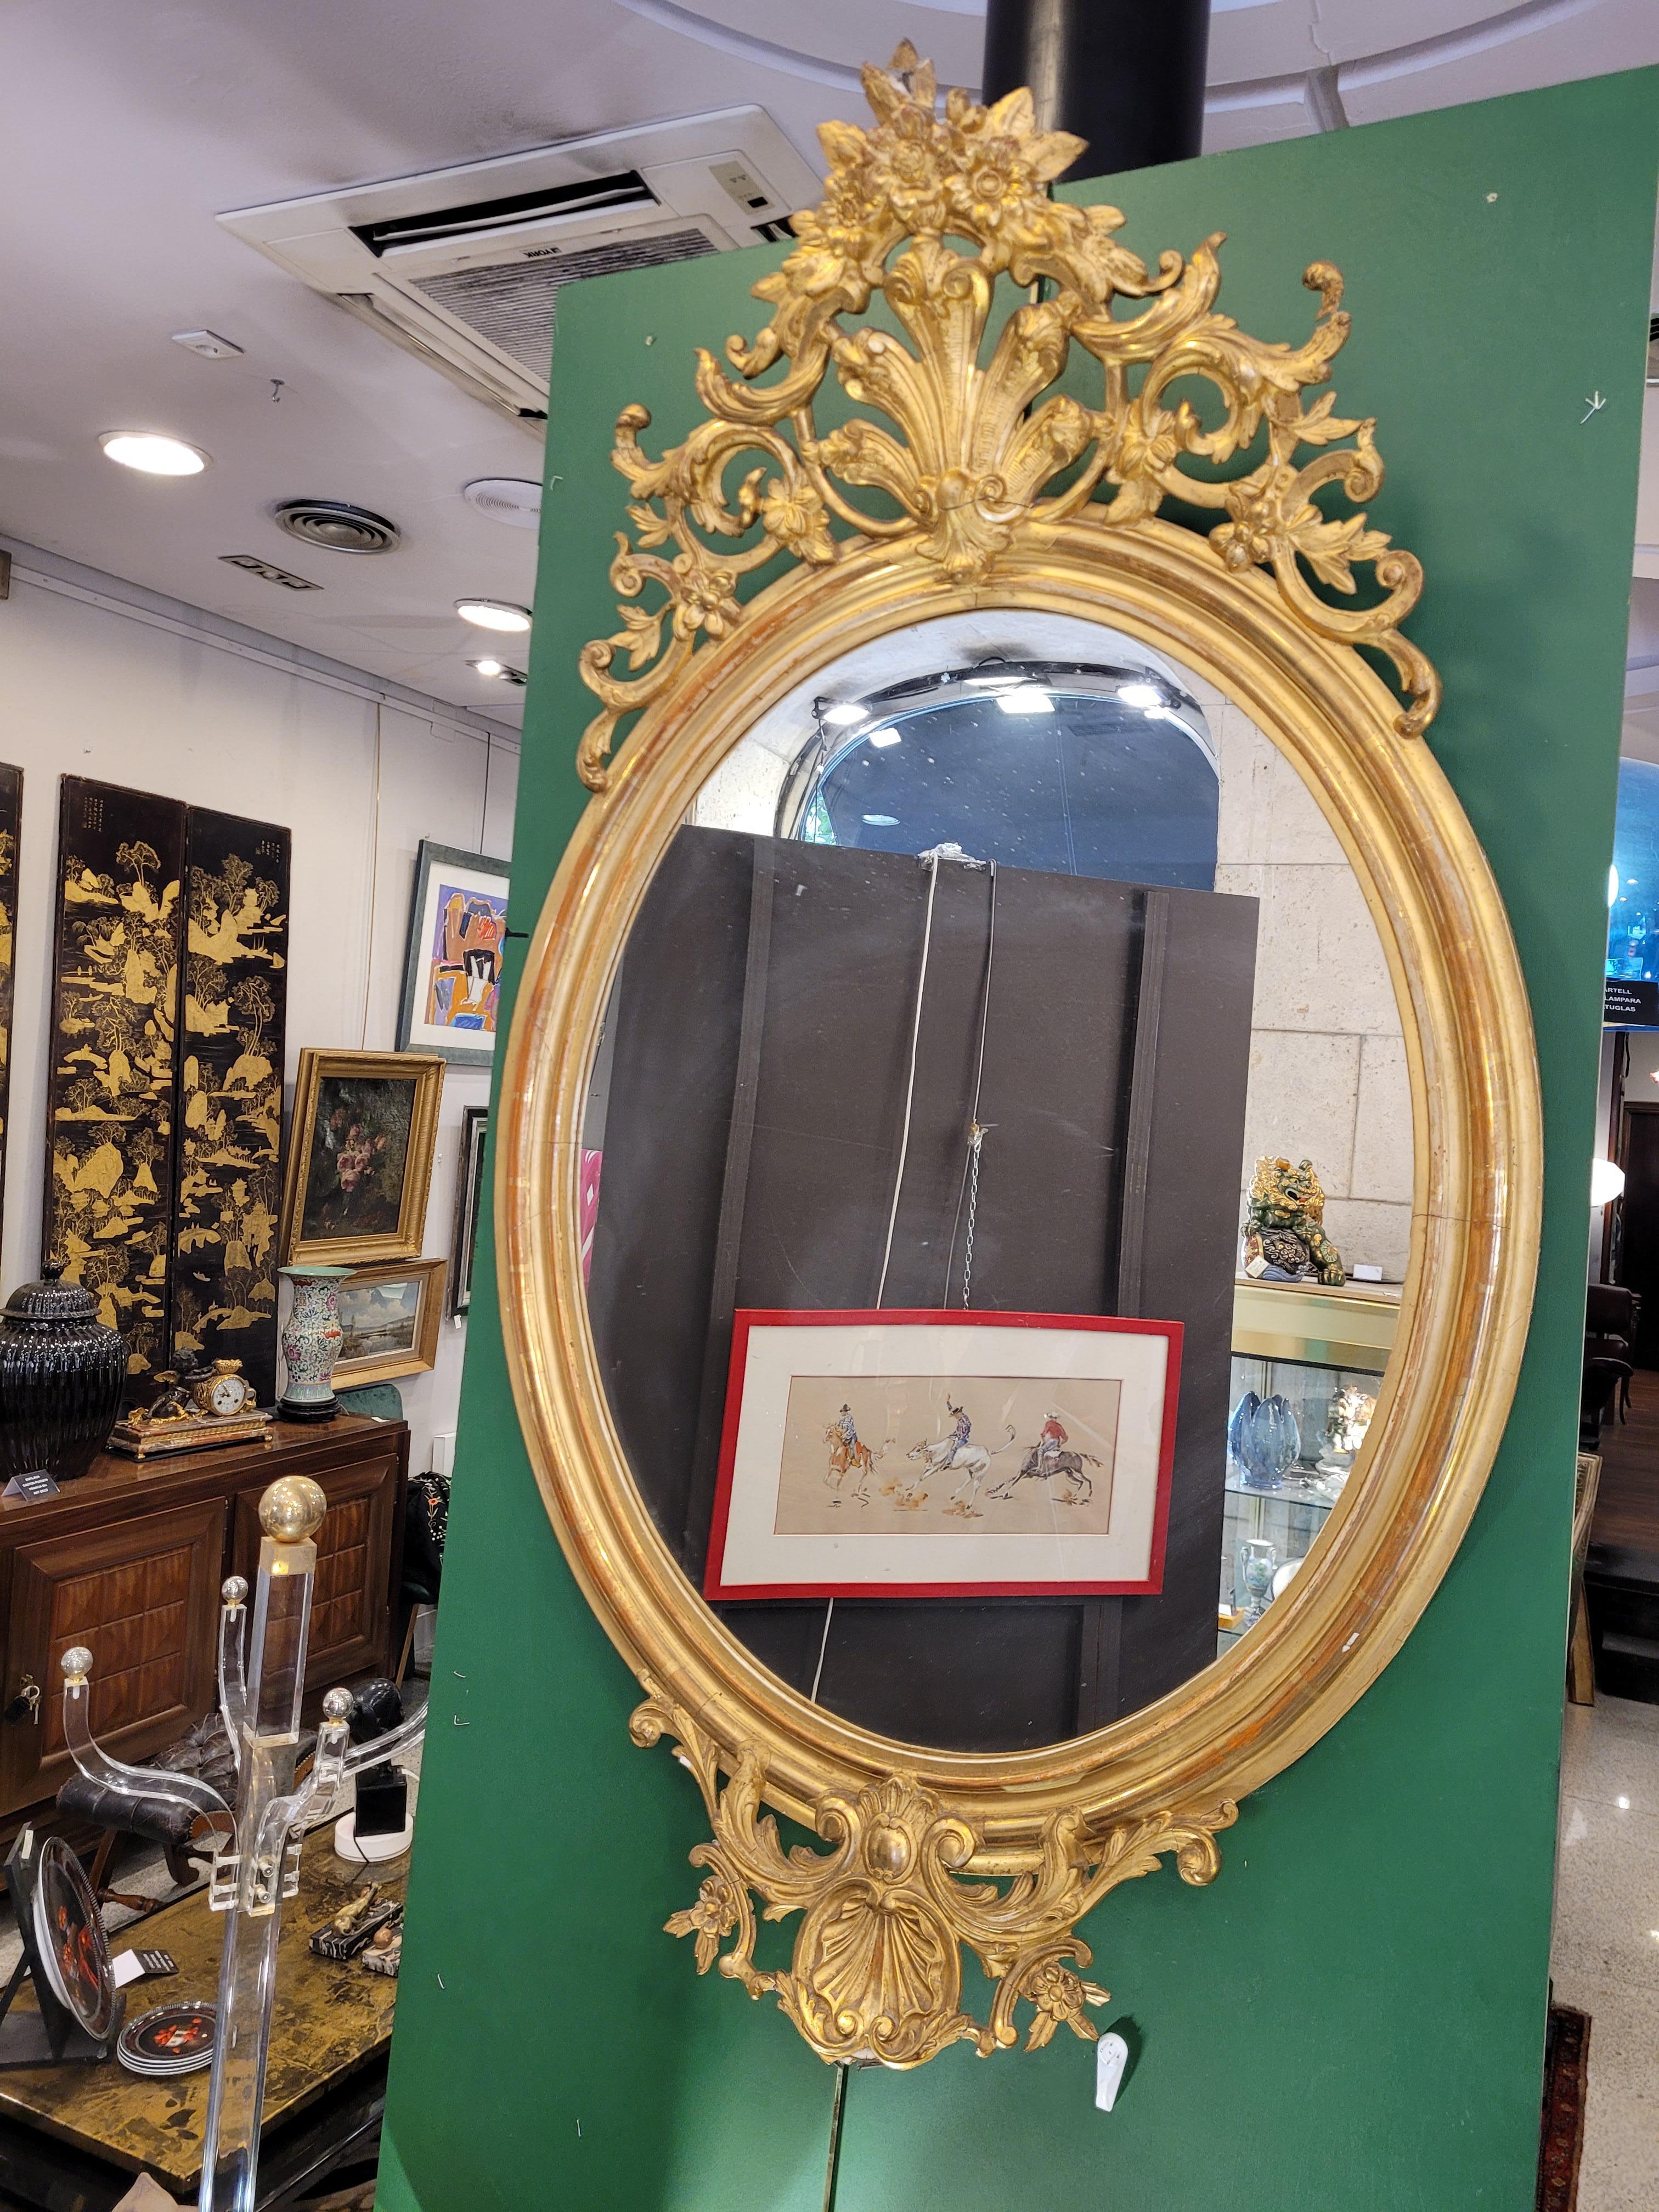 Mirror from the time of Napoleon III, with an ornate gilt carved wood on its upper part, and on the lower part
The highest point of this decorative object is adorned with a spectacular rockery embellished with scrollwork and carved flowers. In the